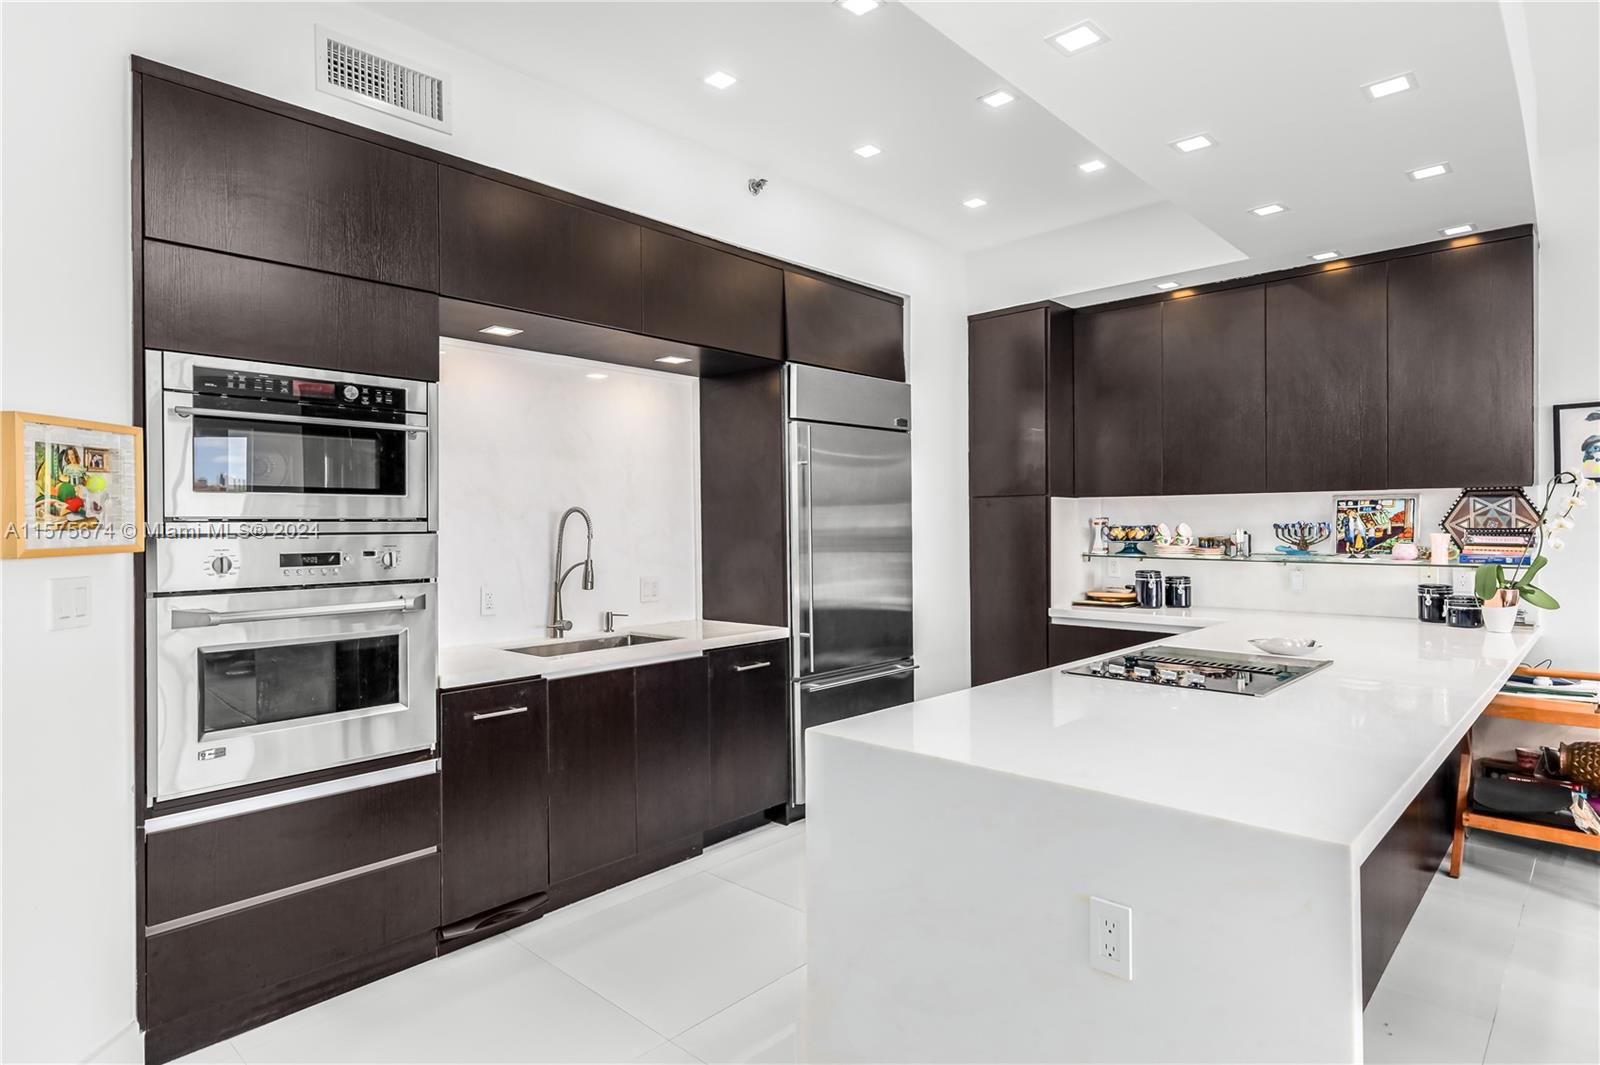 a kitchen with kitchen island stainless steel appliances a stove refrigerator sink and cabinets